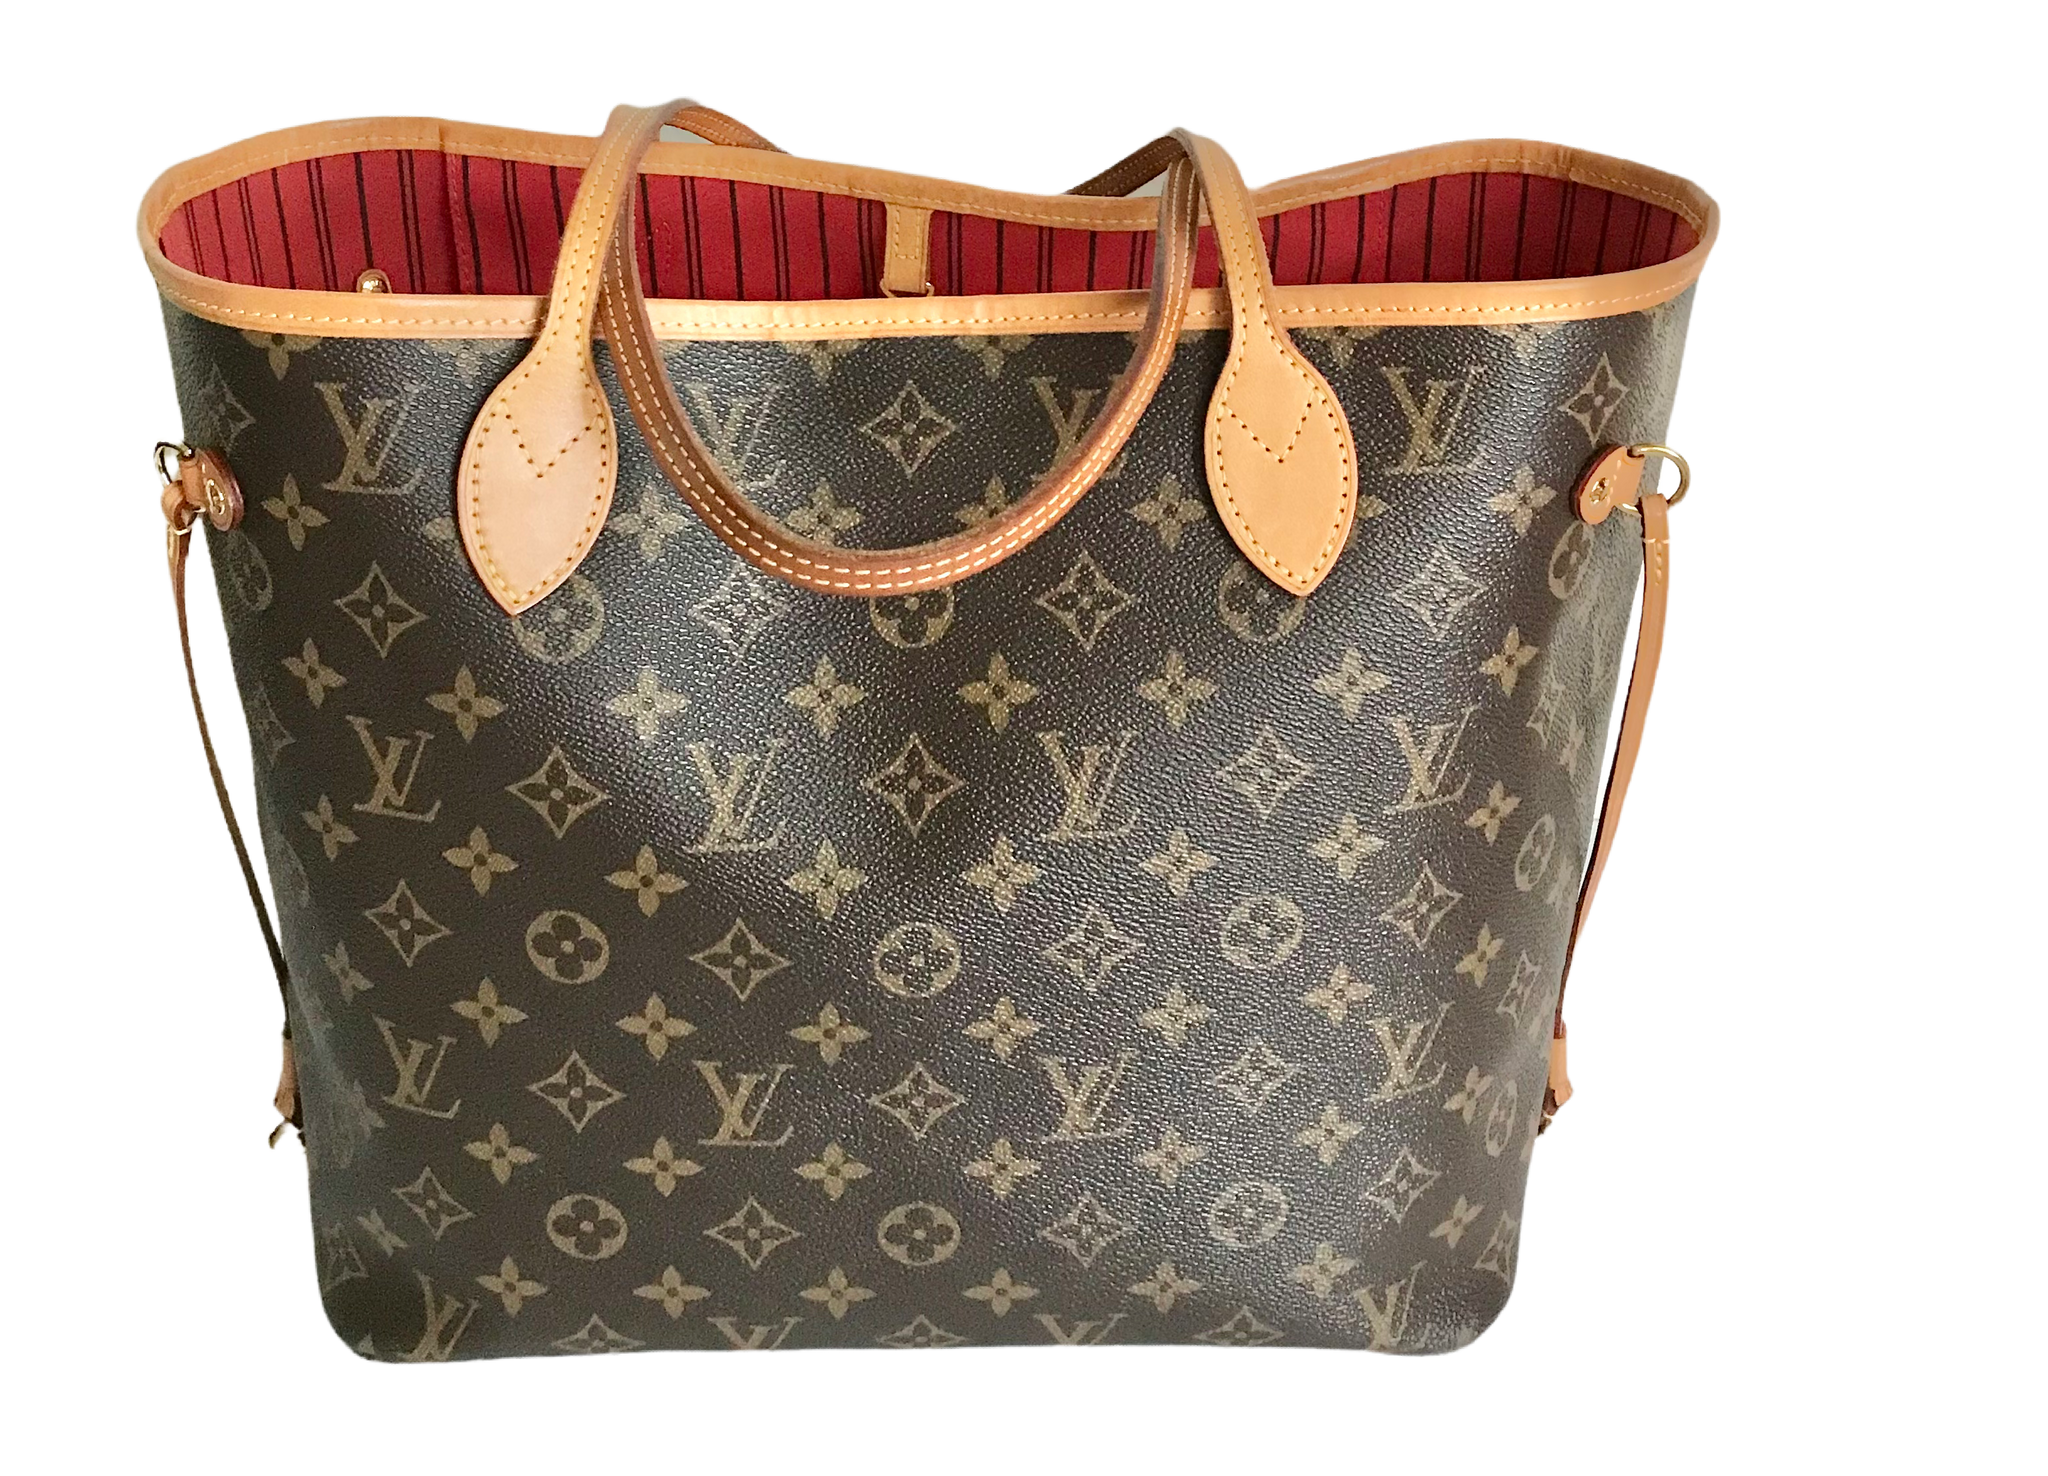 AUTHENTIC Louis Vuitton Neverfull Monogram Cherry MM PREOWNED